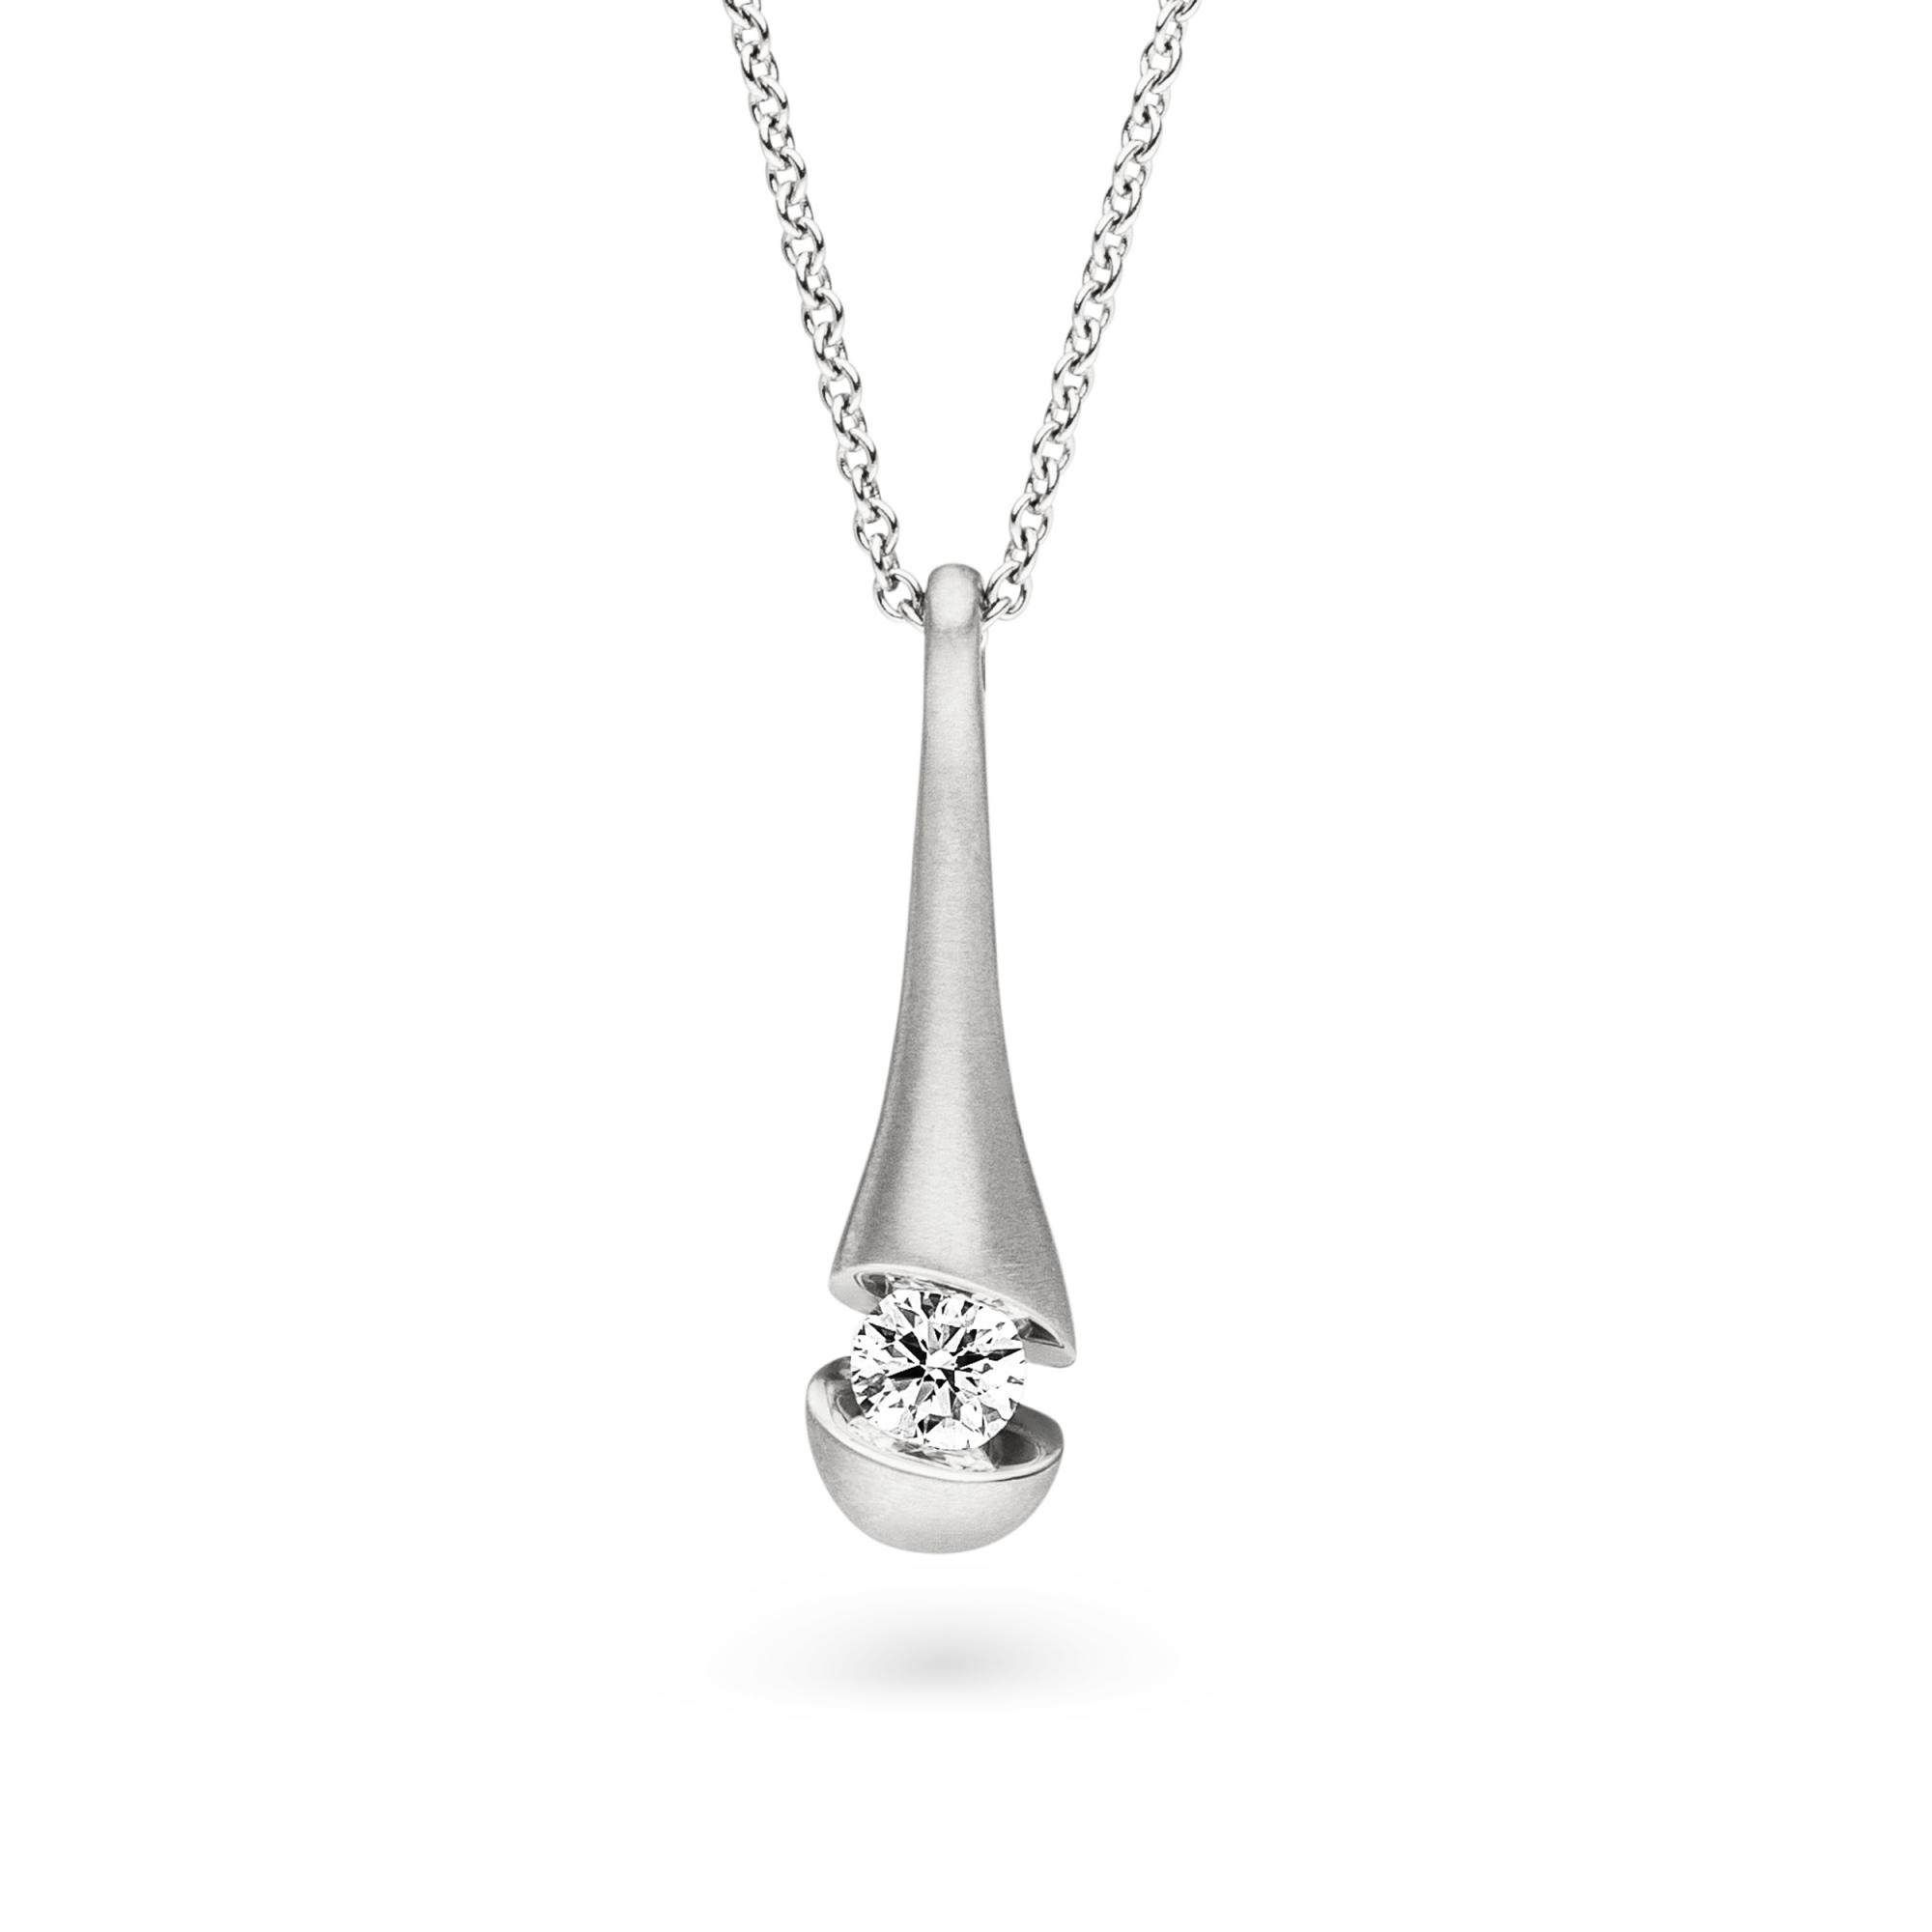 White gold pendant with a diamond between two shiny surfaces.